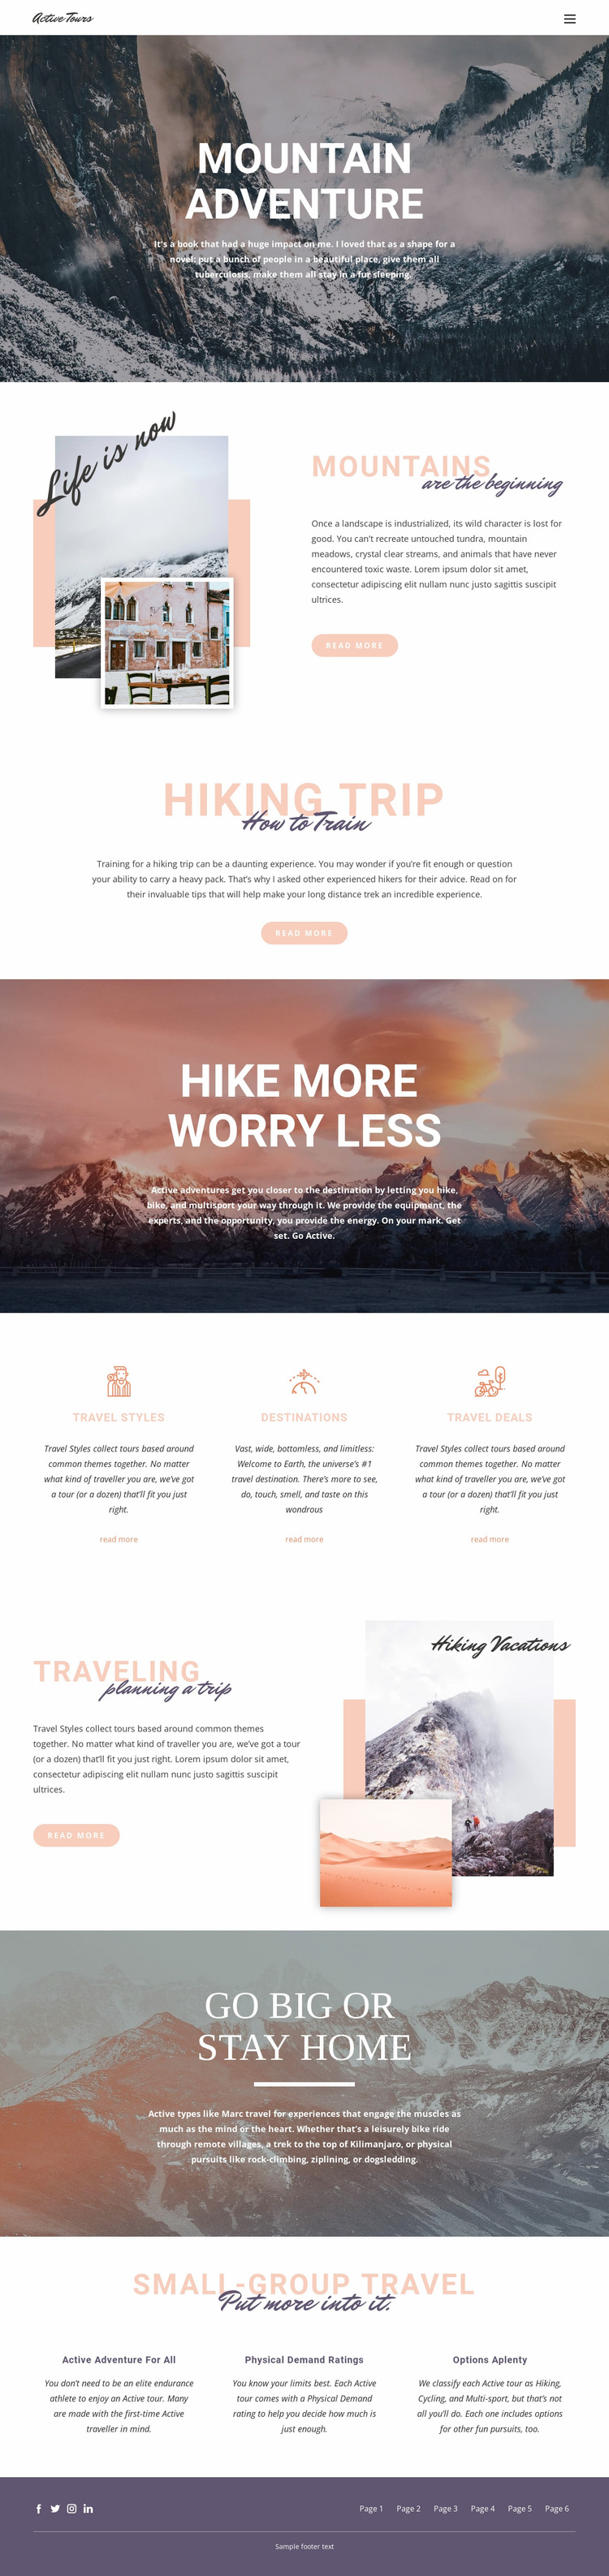 Guided backpacking trips Website Builder Templates